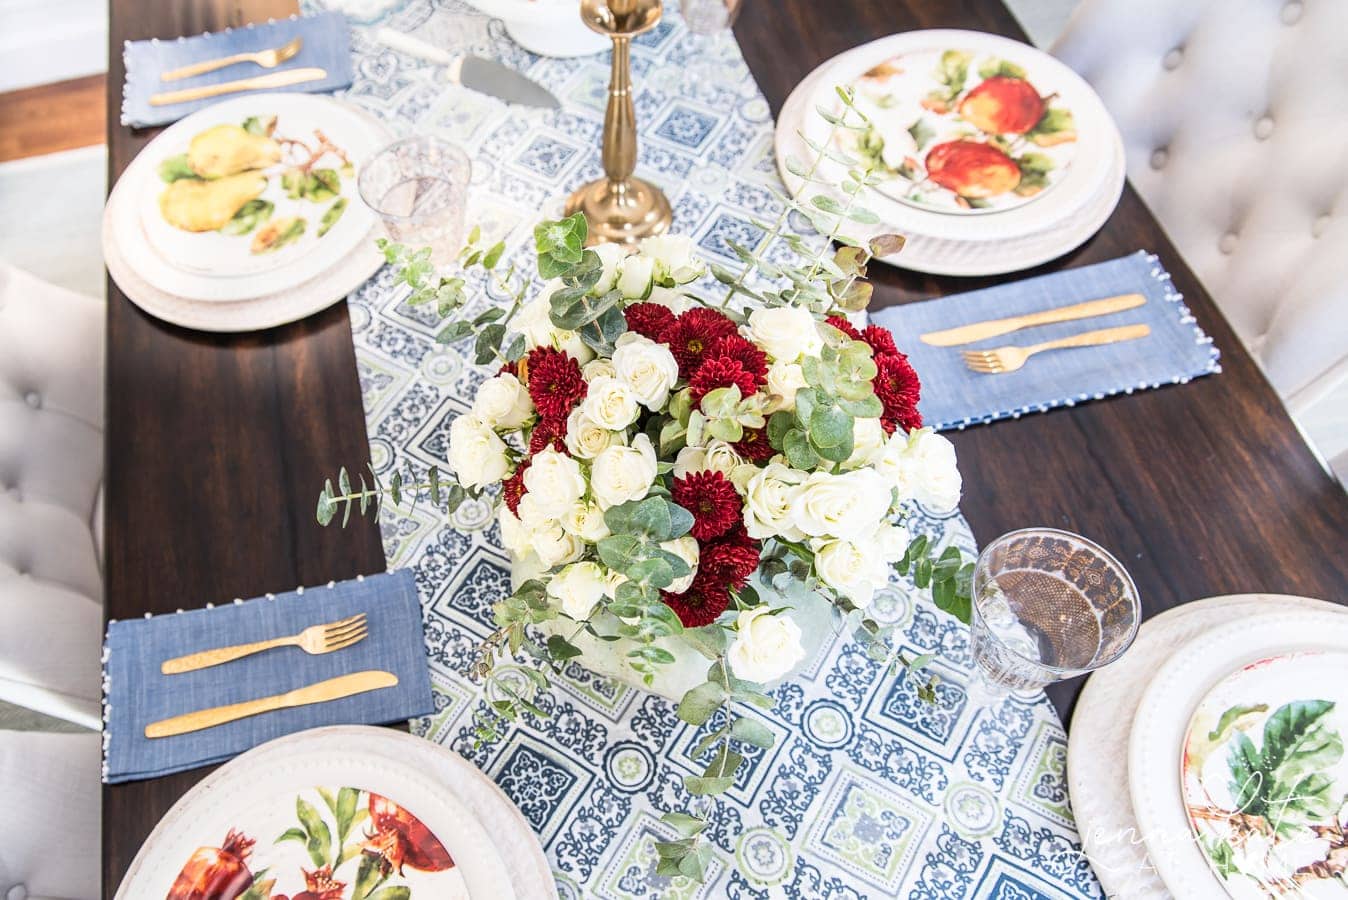 A top view of the dining table, showing the tips of the floral centerpiece, and the place settings, including the gold utensils